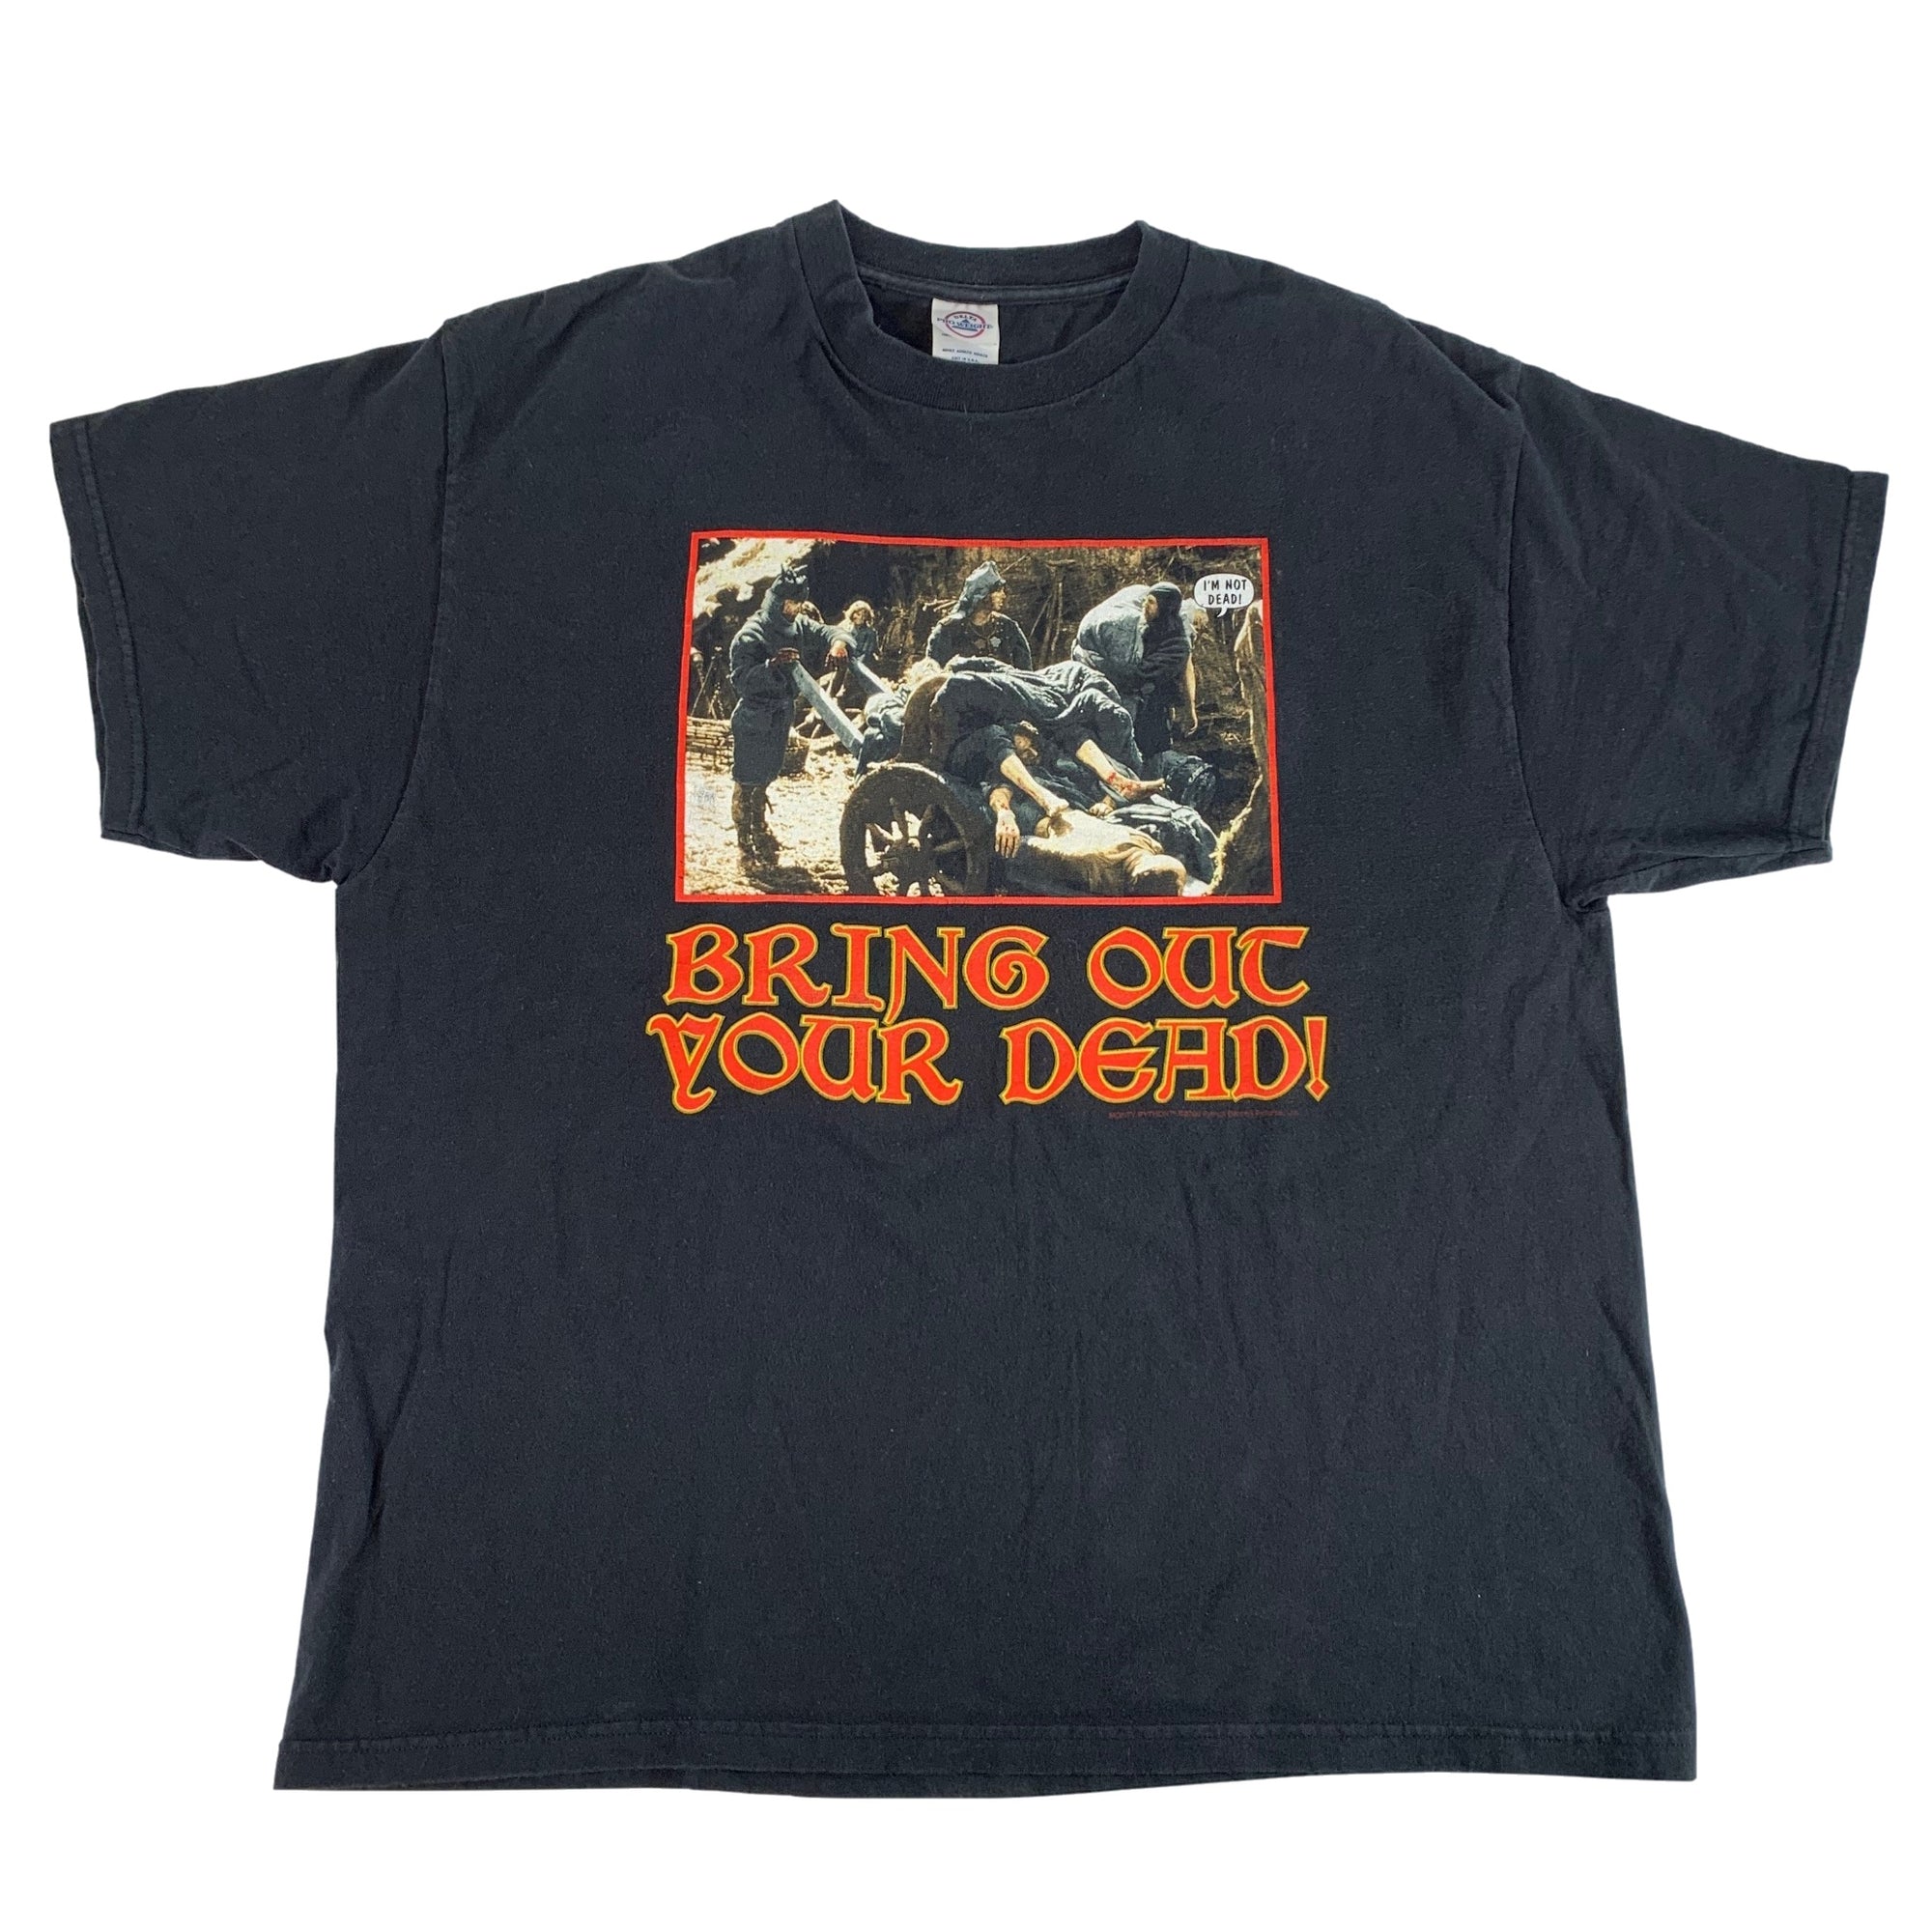 Vintage Monty Python "Bring Out Your Dead!" T-Shirt - jointcustodydc